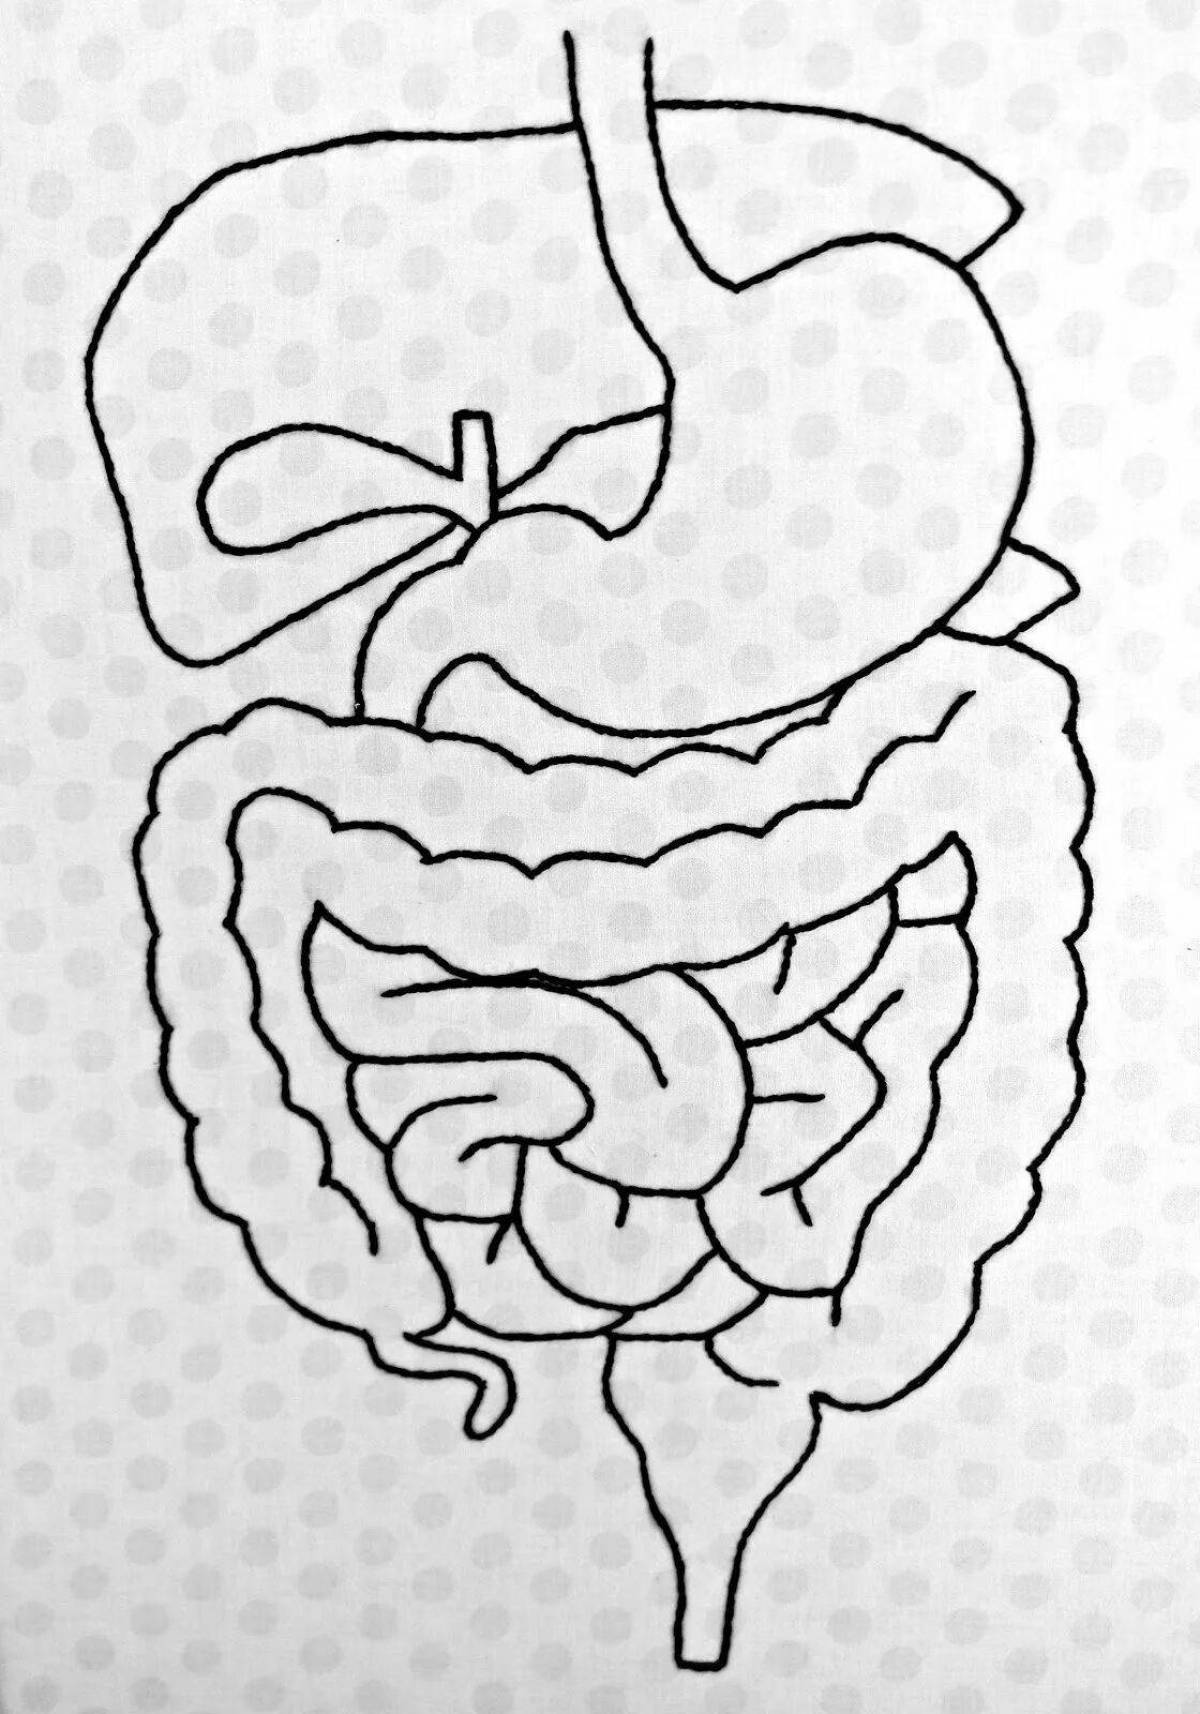 Detailed coloring of the human digestive system